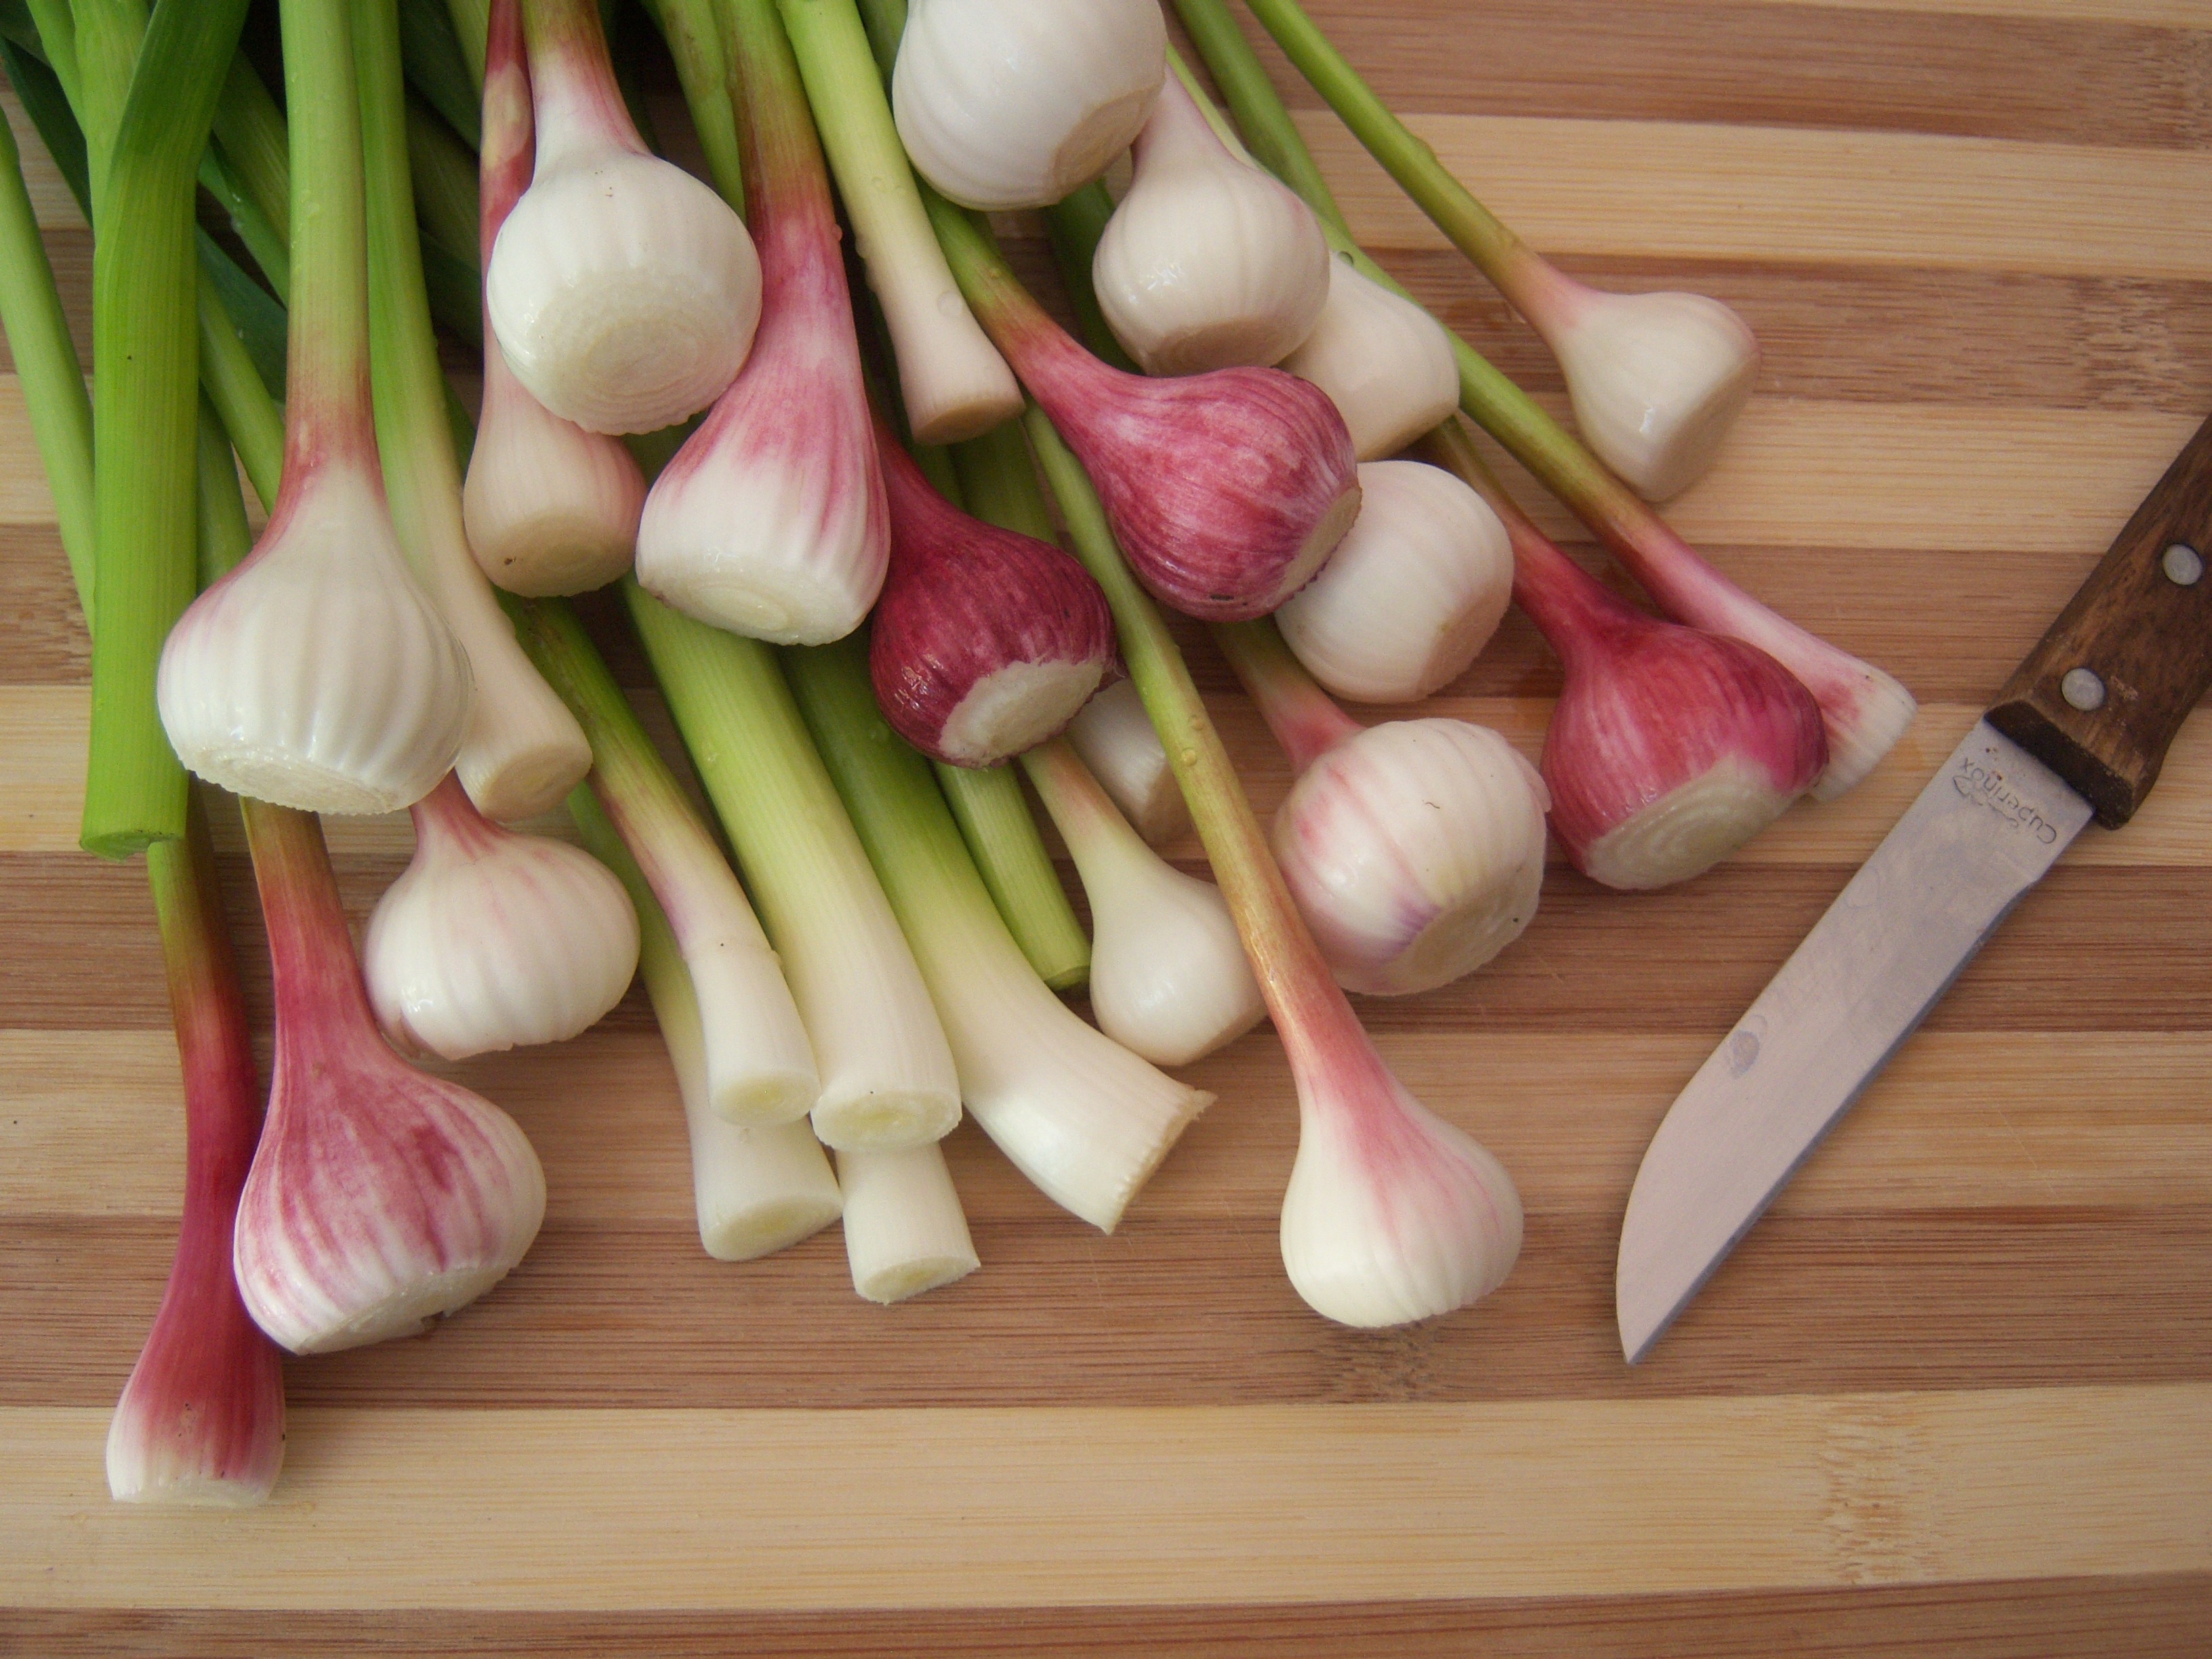 114874 download wallpaper food, vegetables, cutting board, garlic, knife screensavers and pictures for free